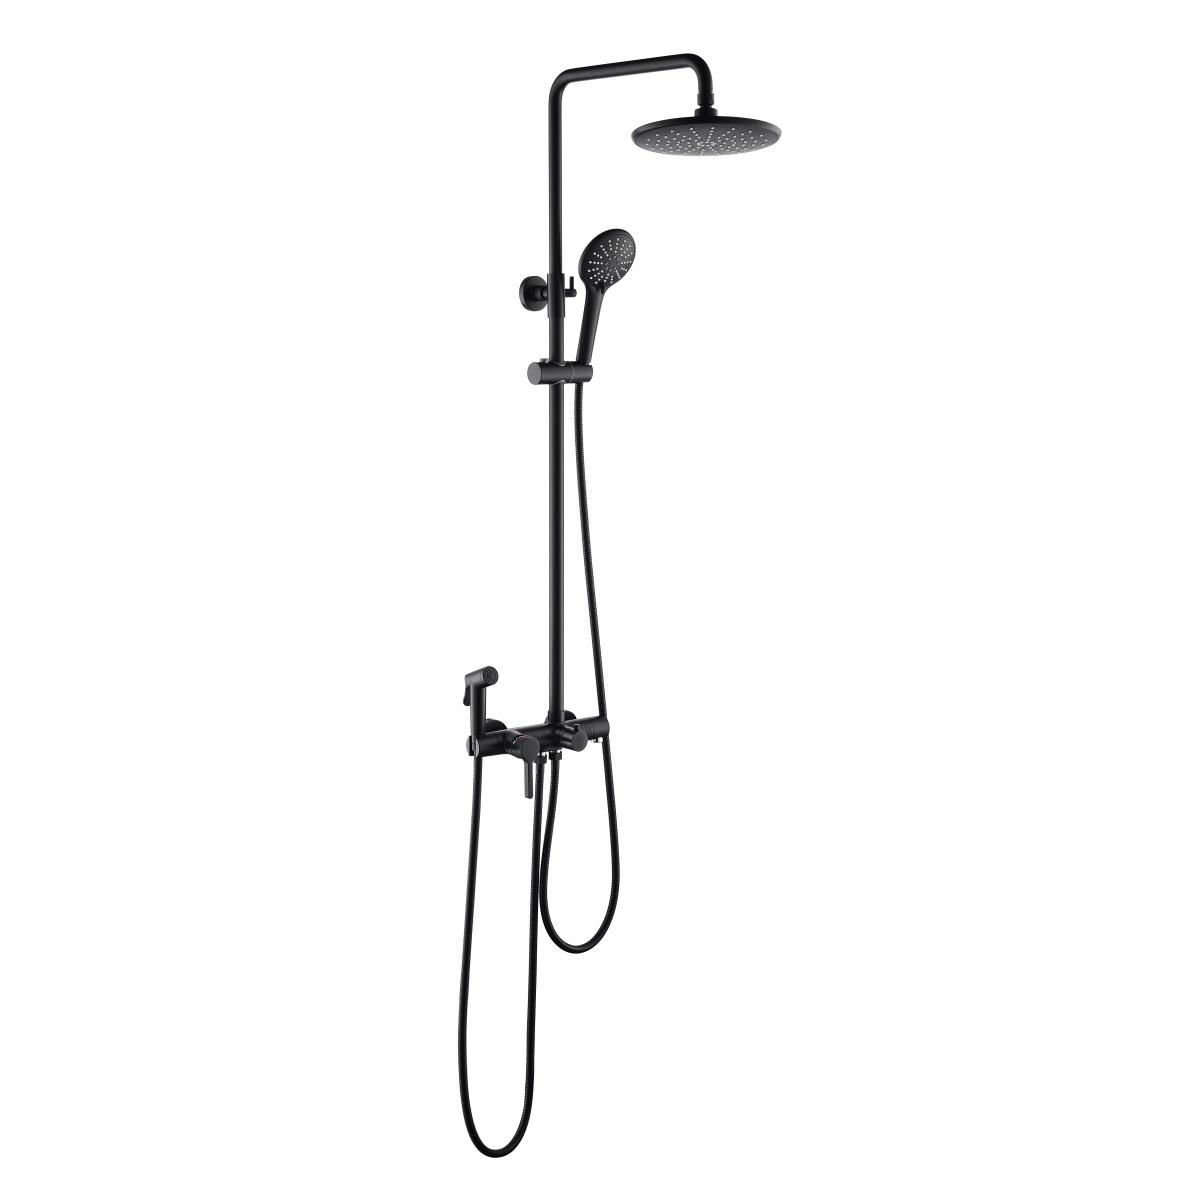 YS34244	Multi-purpose shower column, rain shower column with faucet, spout and sprayer, height adjustable;